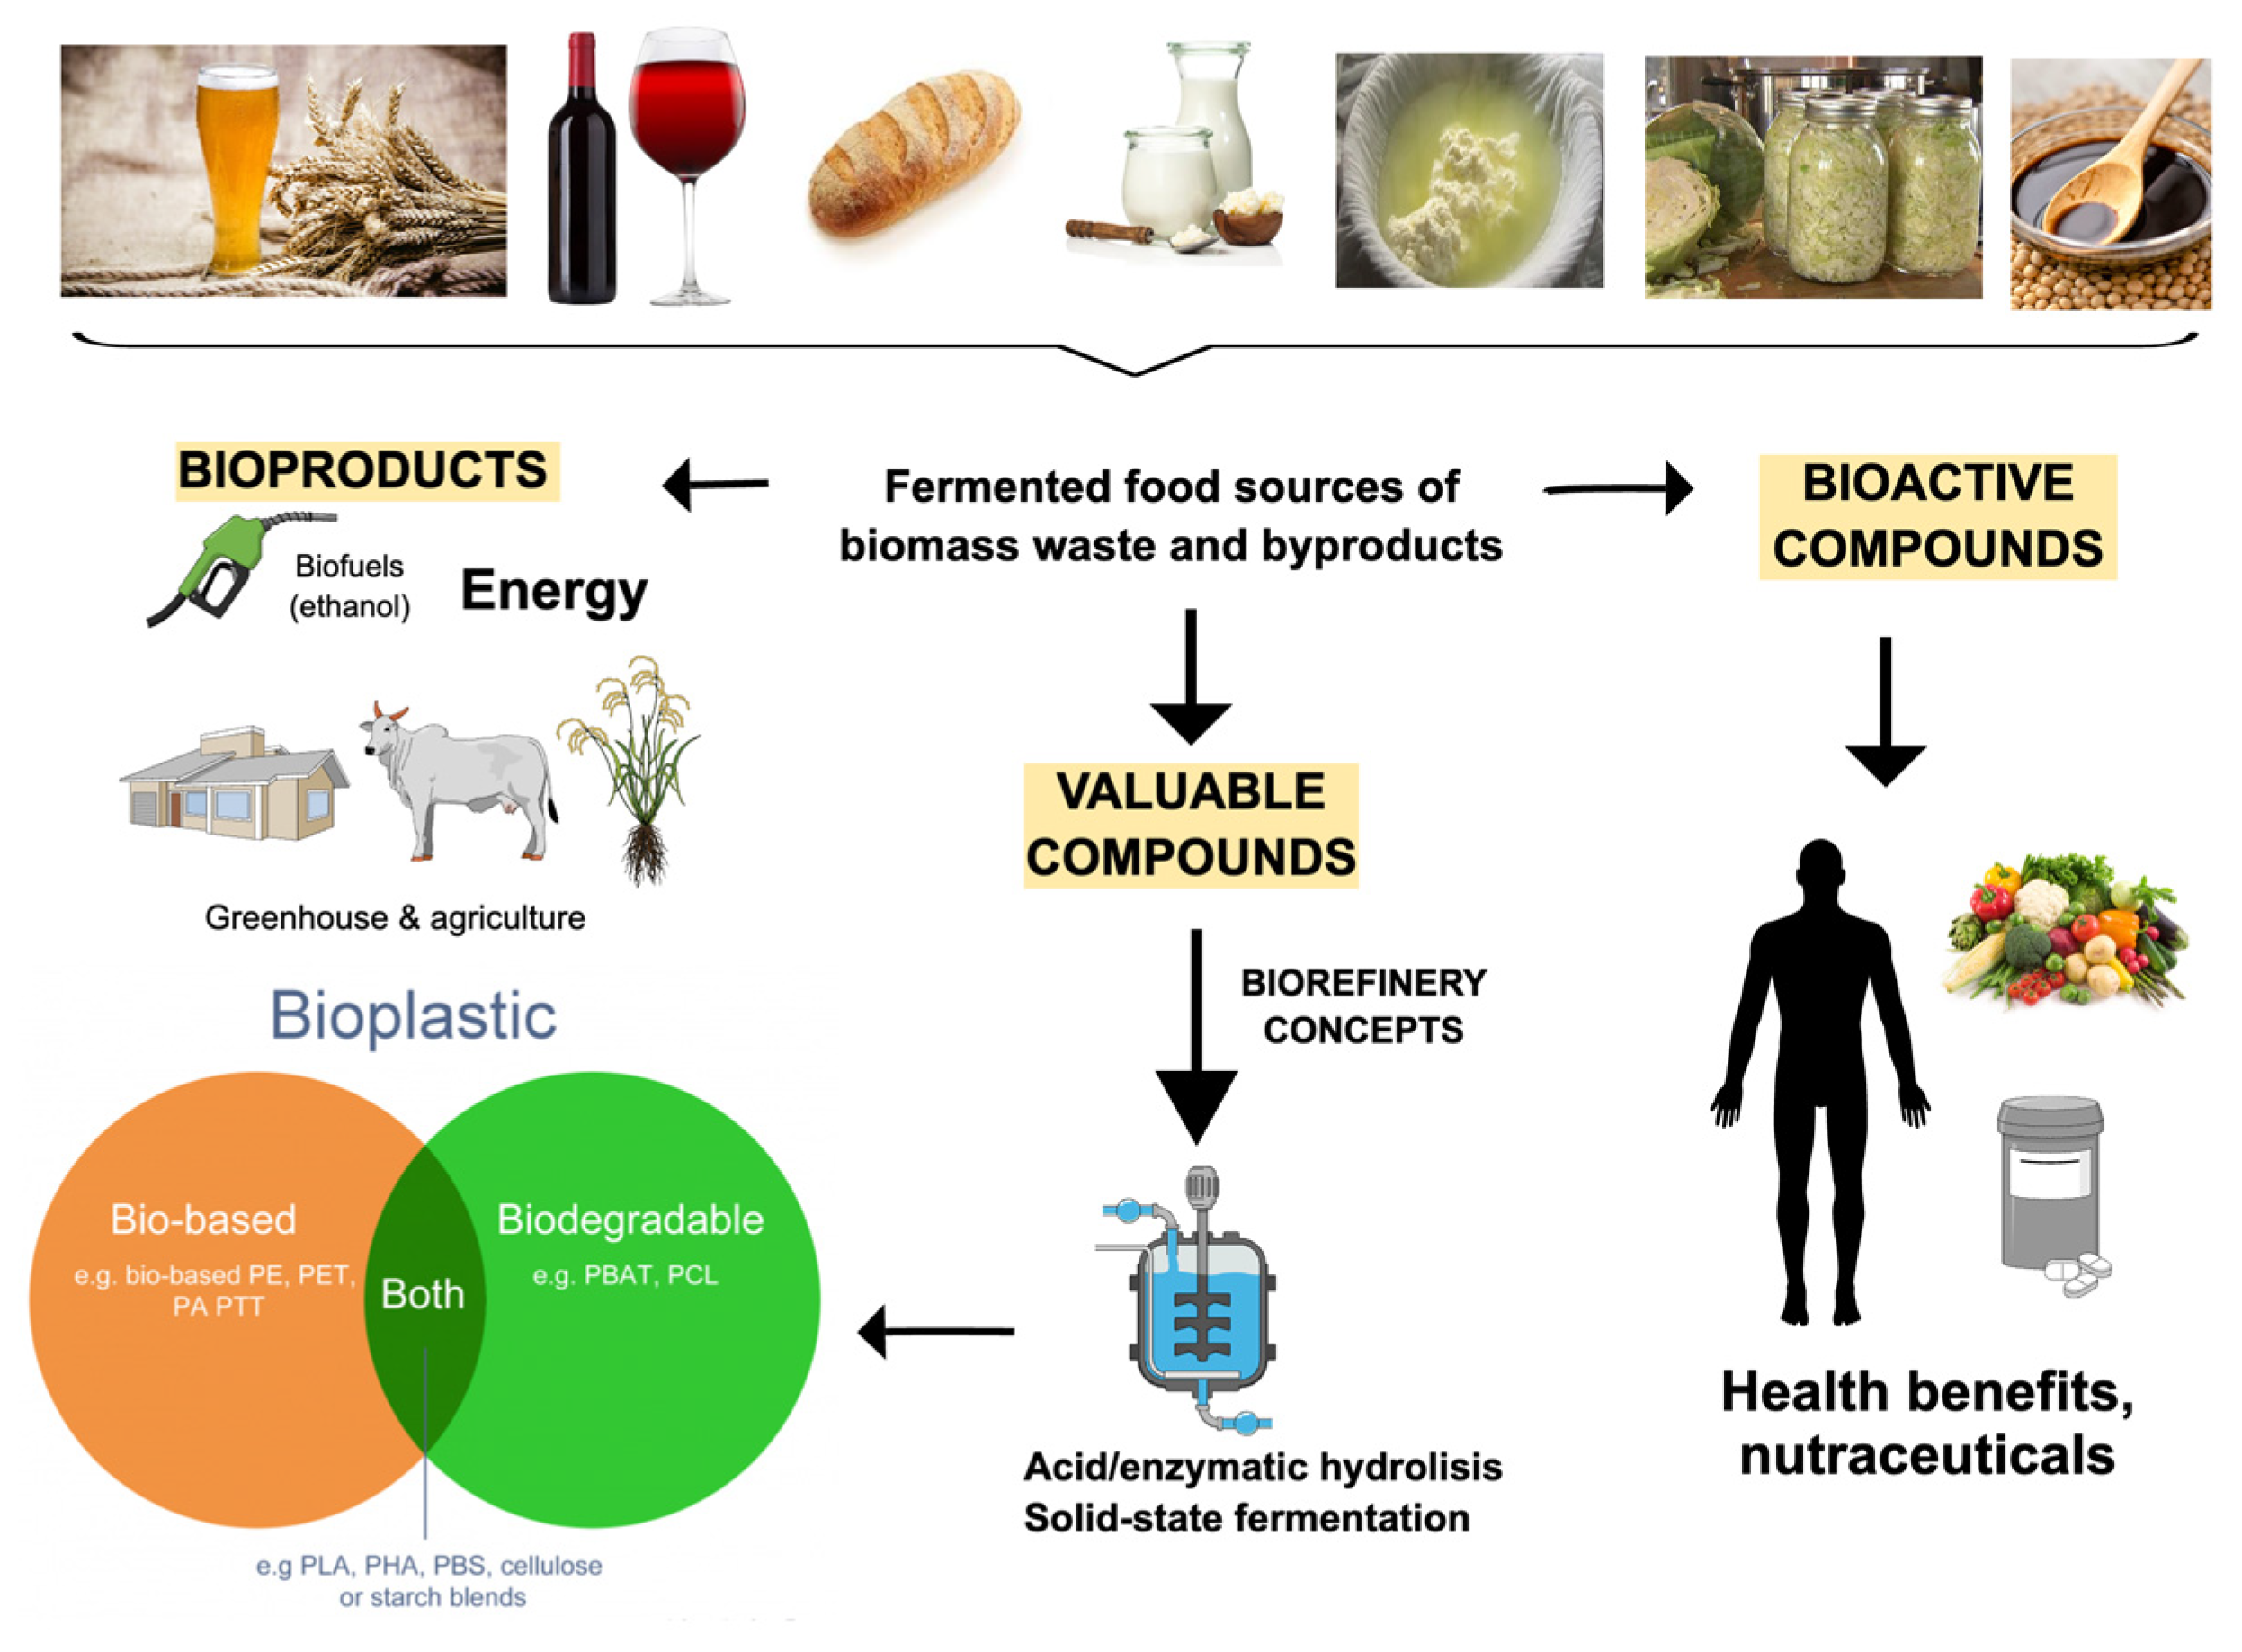 Biochemical biorefinery: A low-cost and non-waste concept for